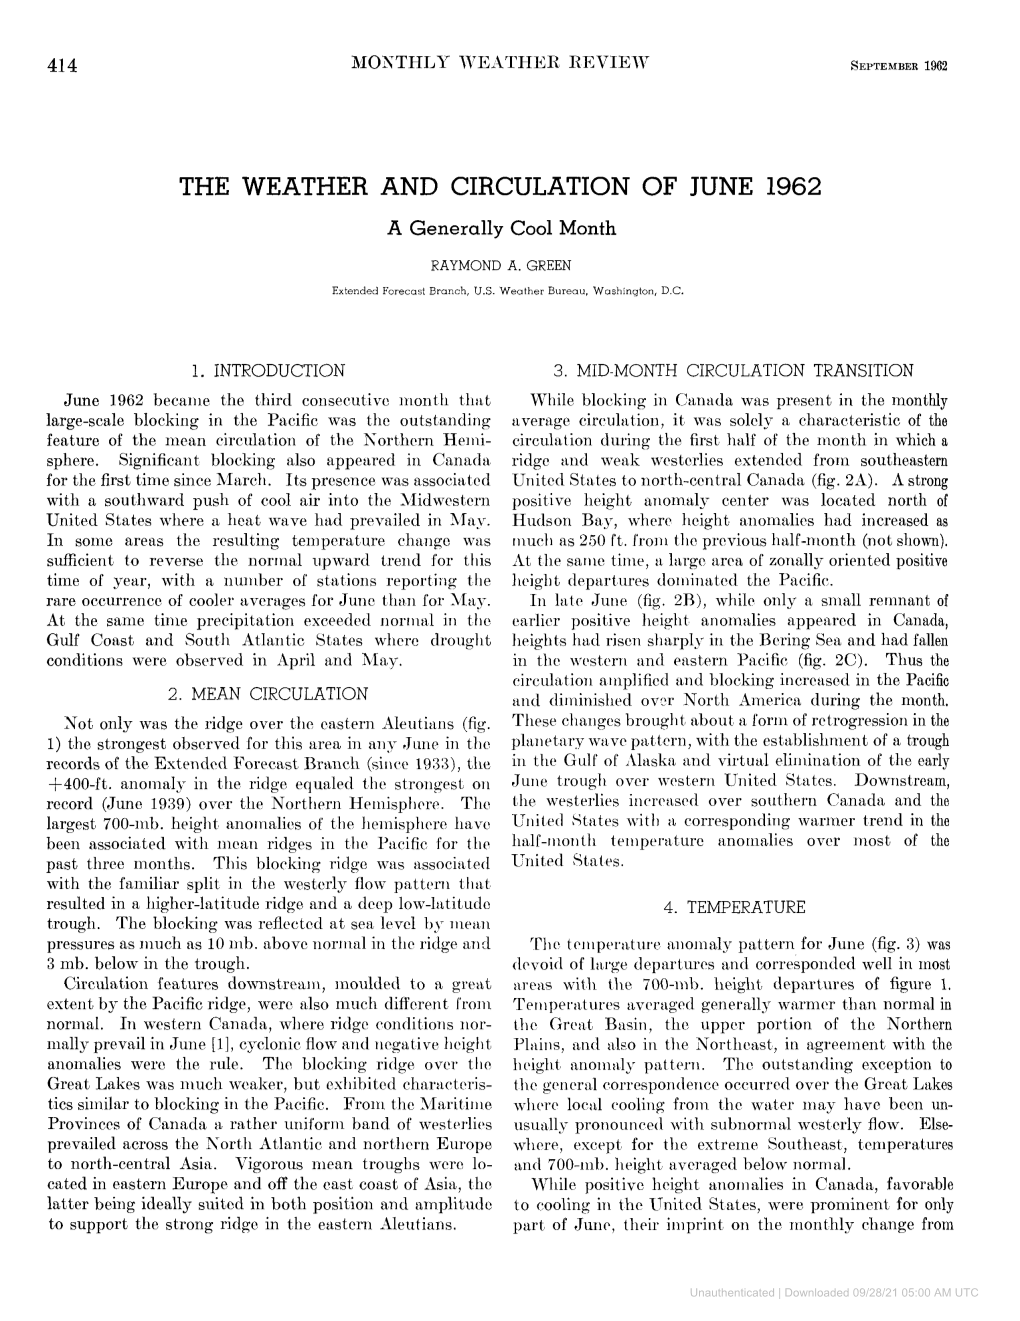 THE WEATHER and CIRCULATION of JUNE 1962 a Generally Cool Month